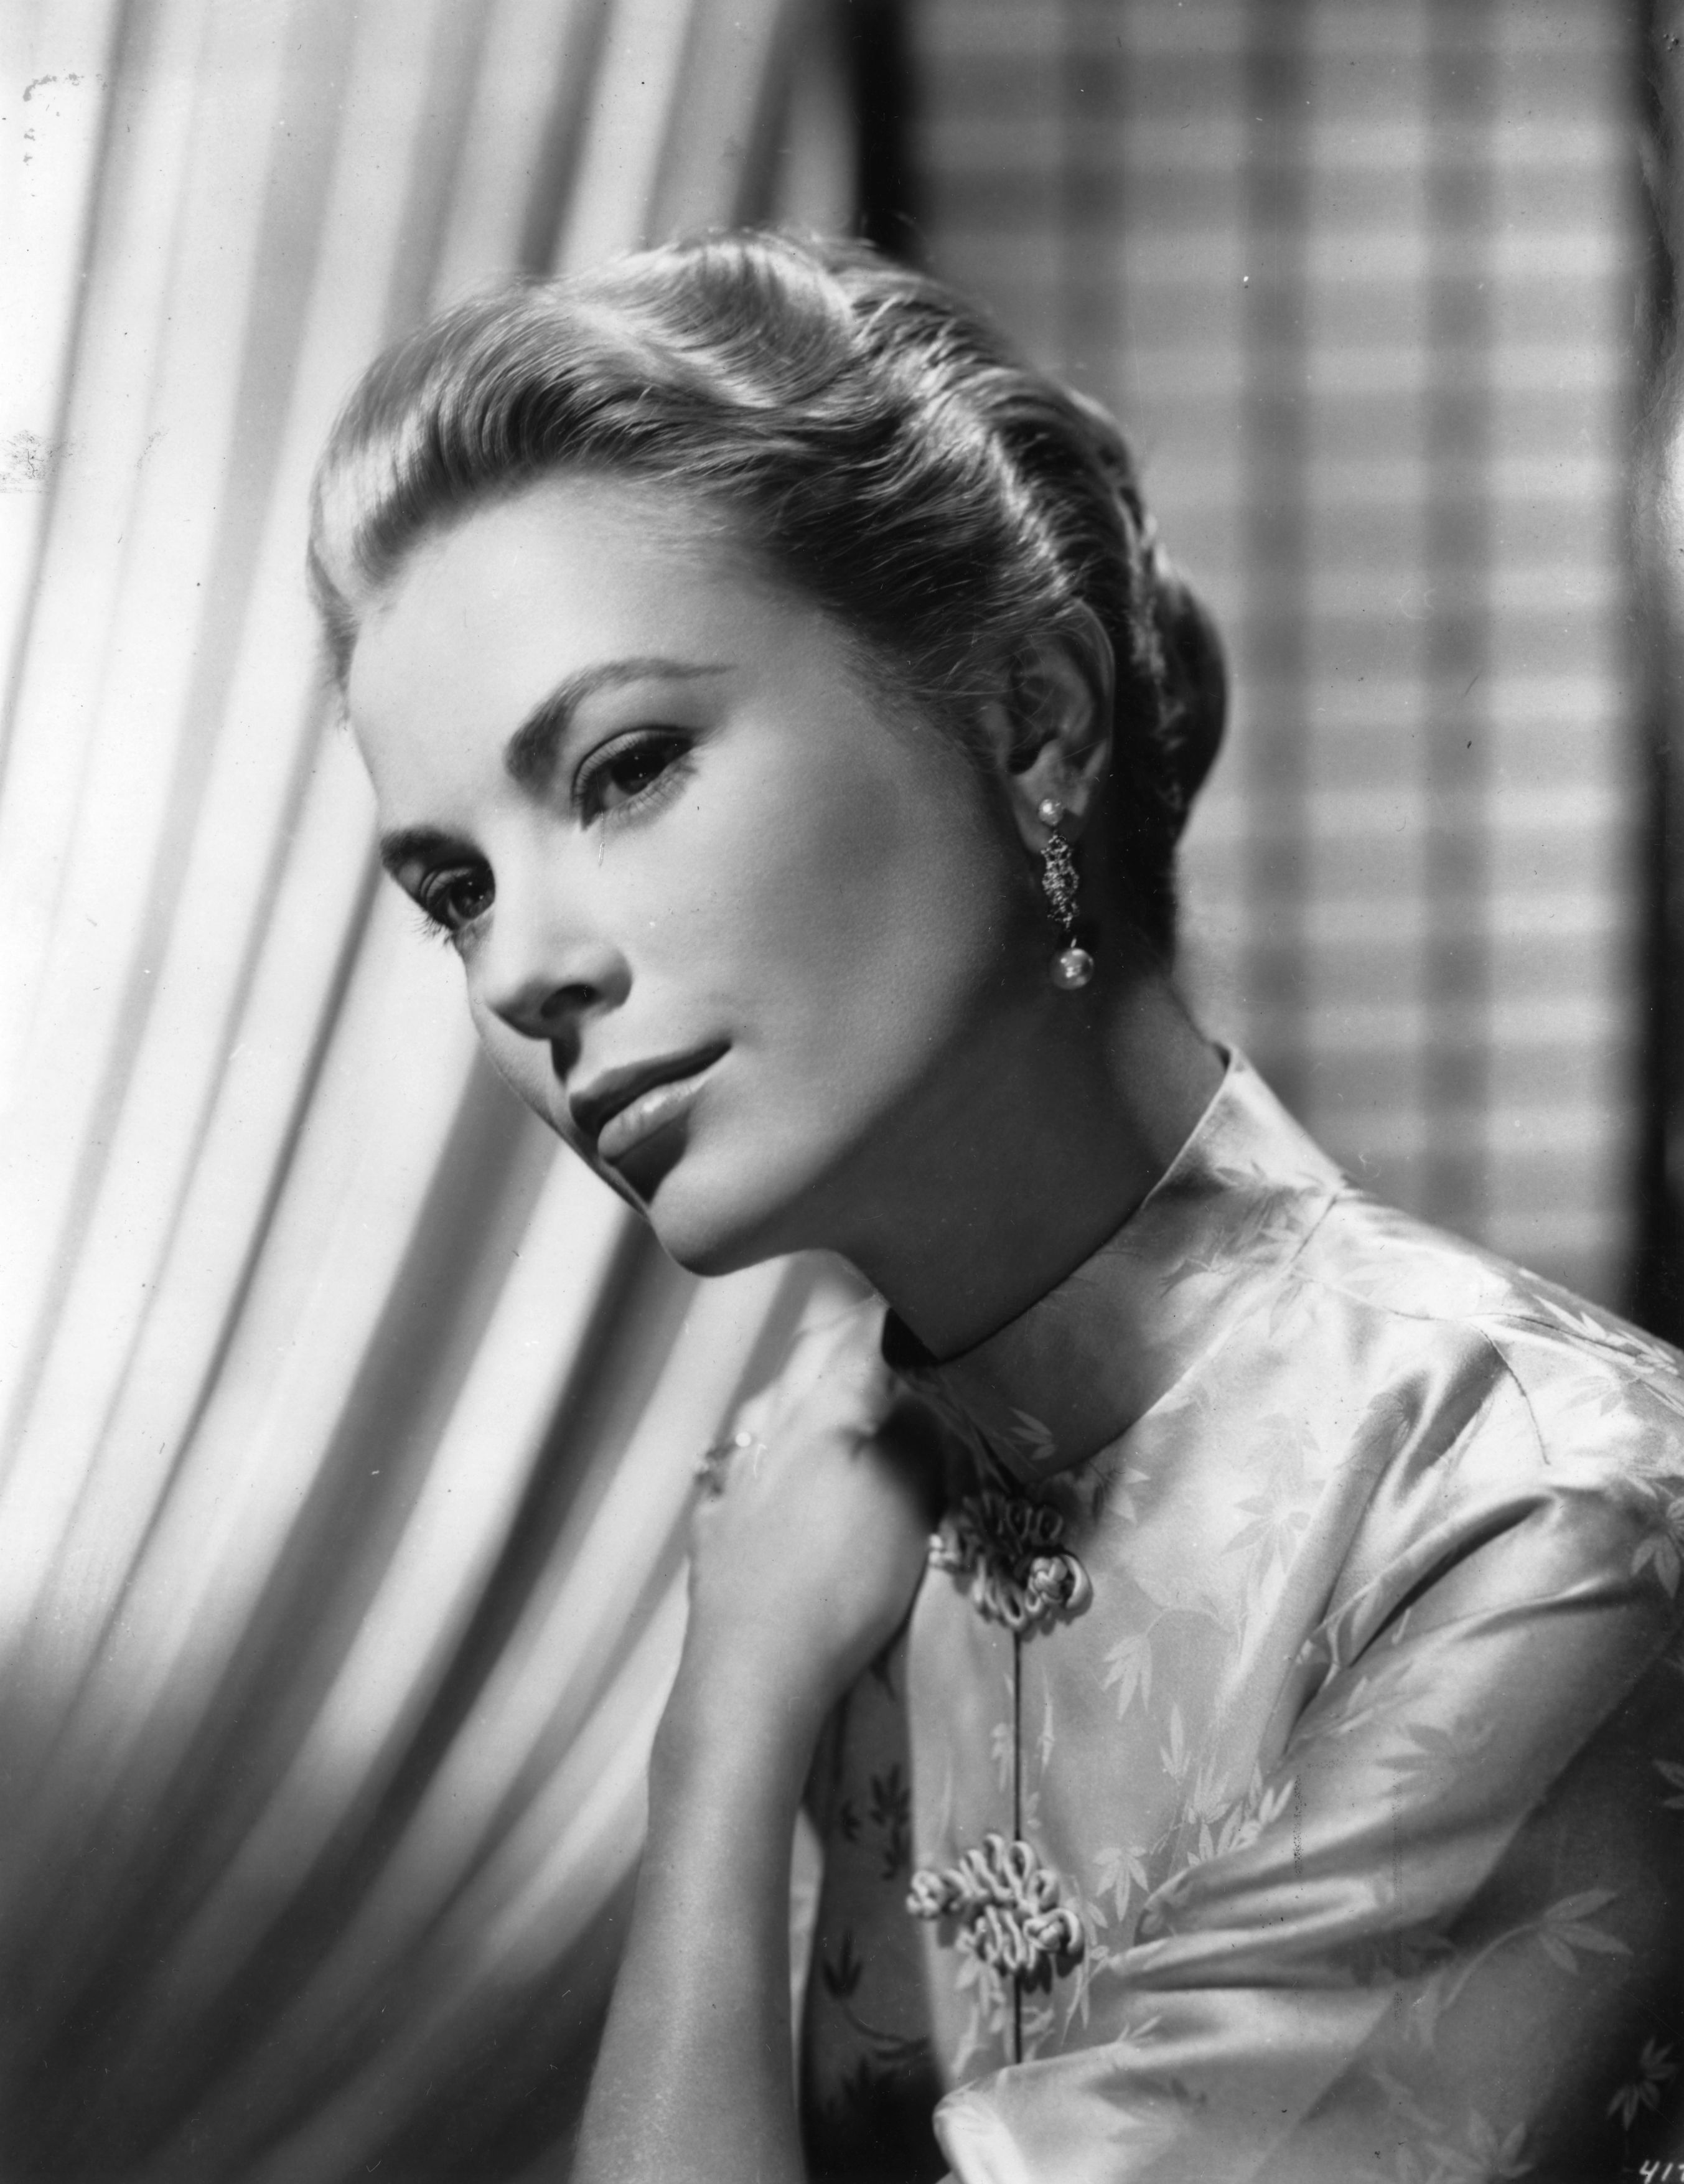 Grace Patricia Kelly, later known as Princess Grace of Monaco, in a black-and-white image on March 8, 1956. | Source: Getty Images